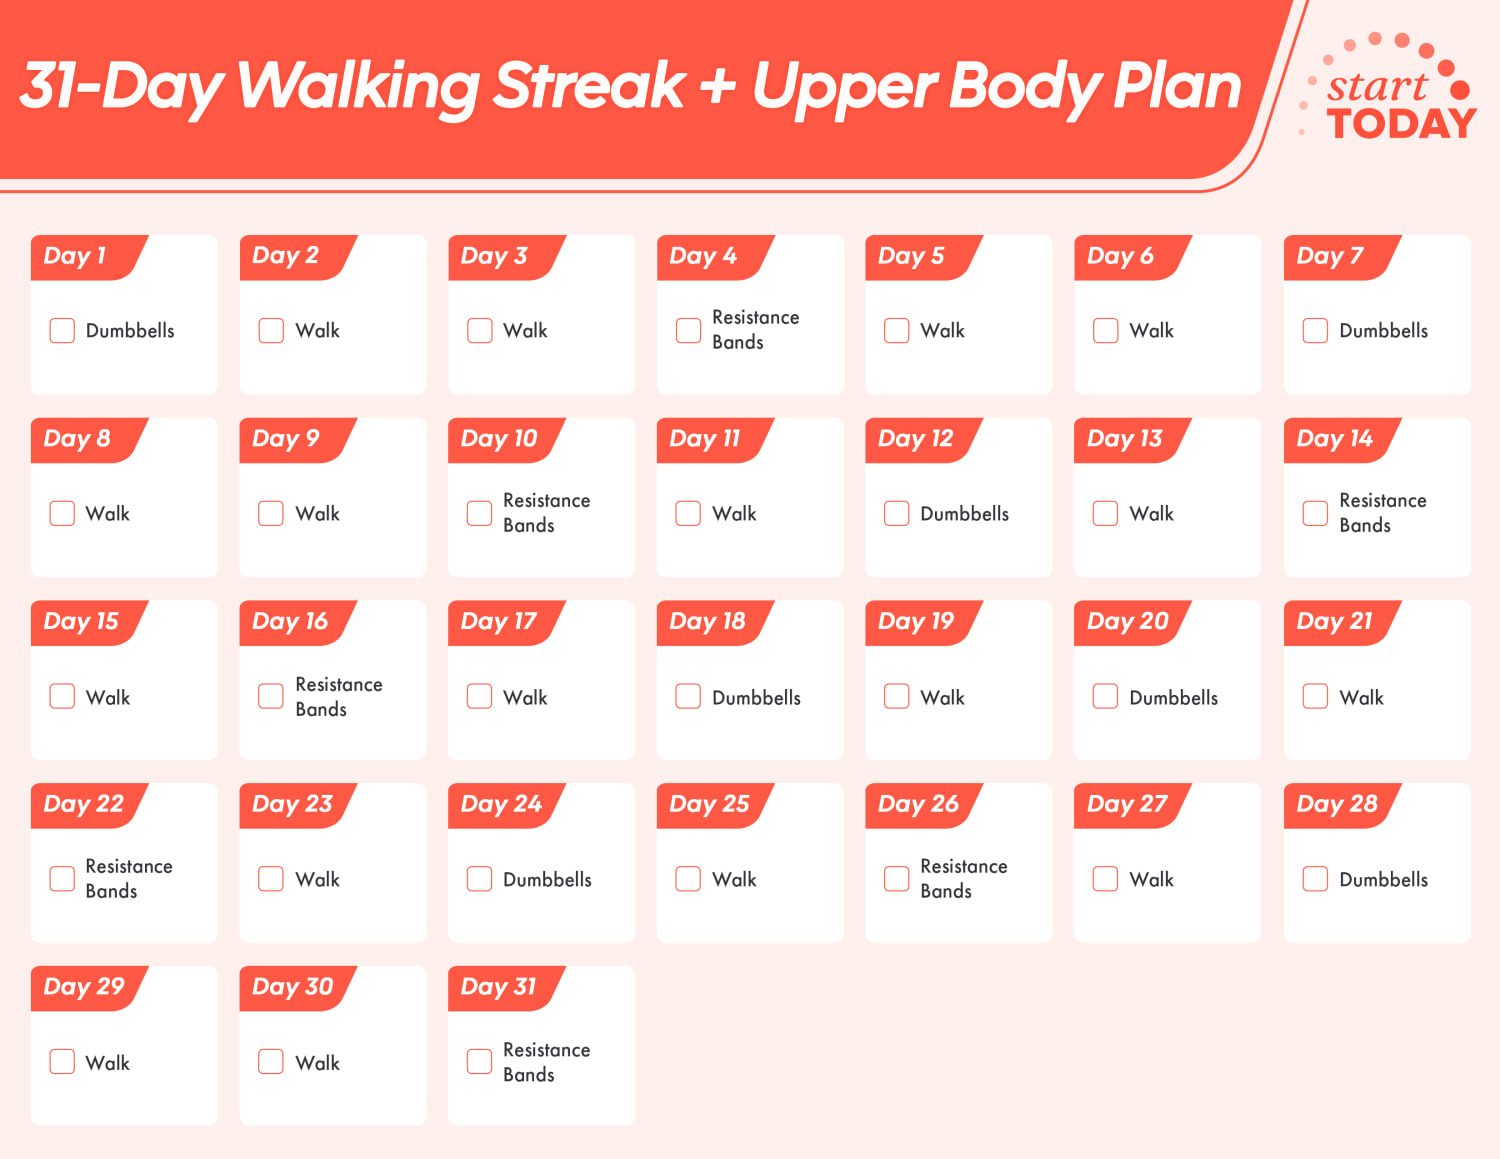 31-Day Workout Plan: Walk and Tone Arms to Build Strength